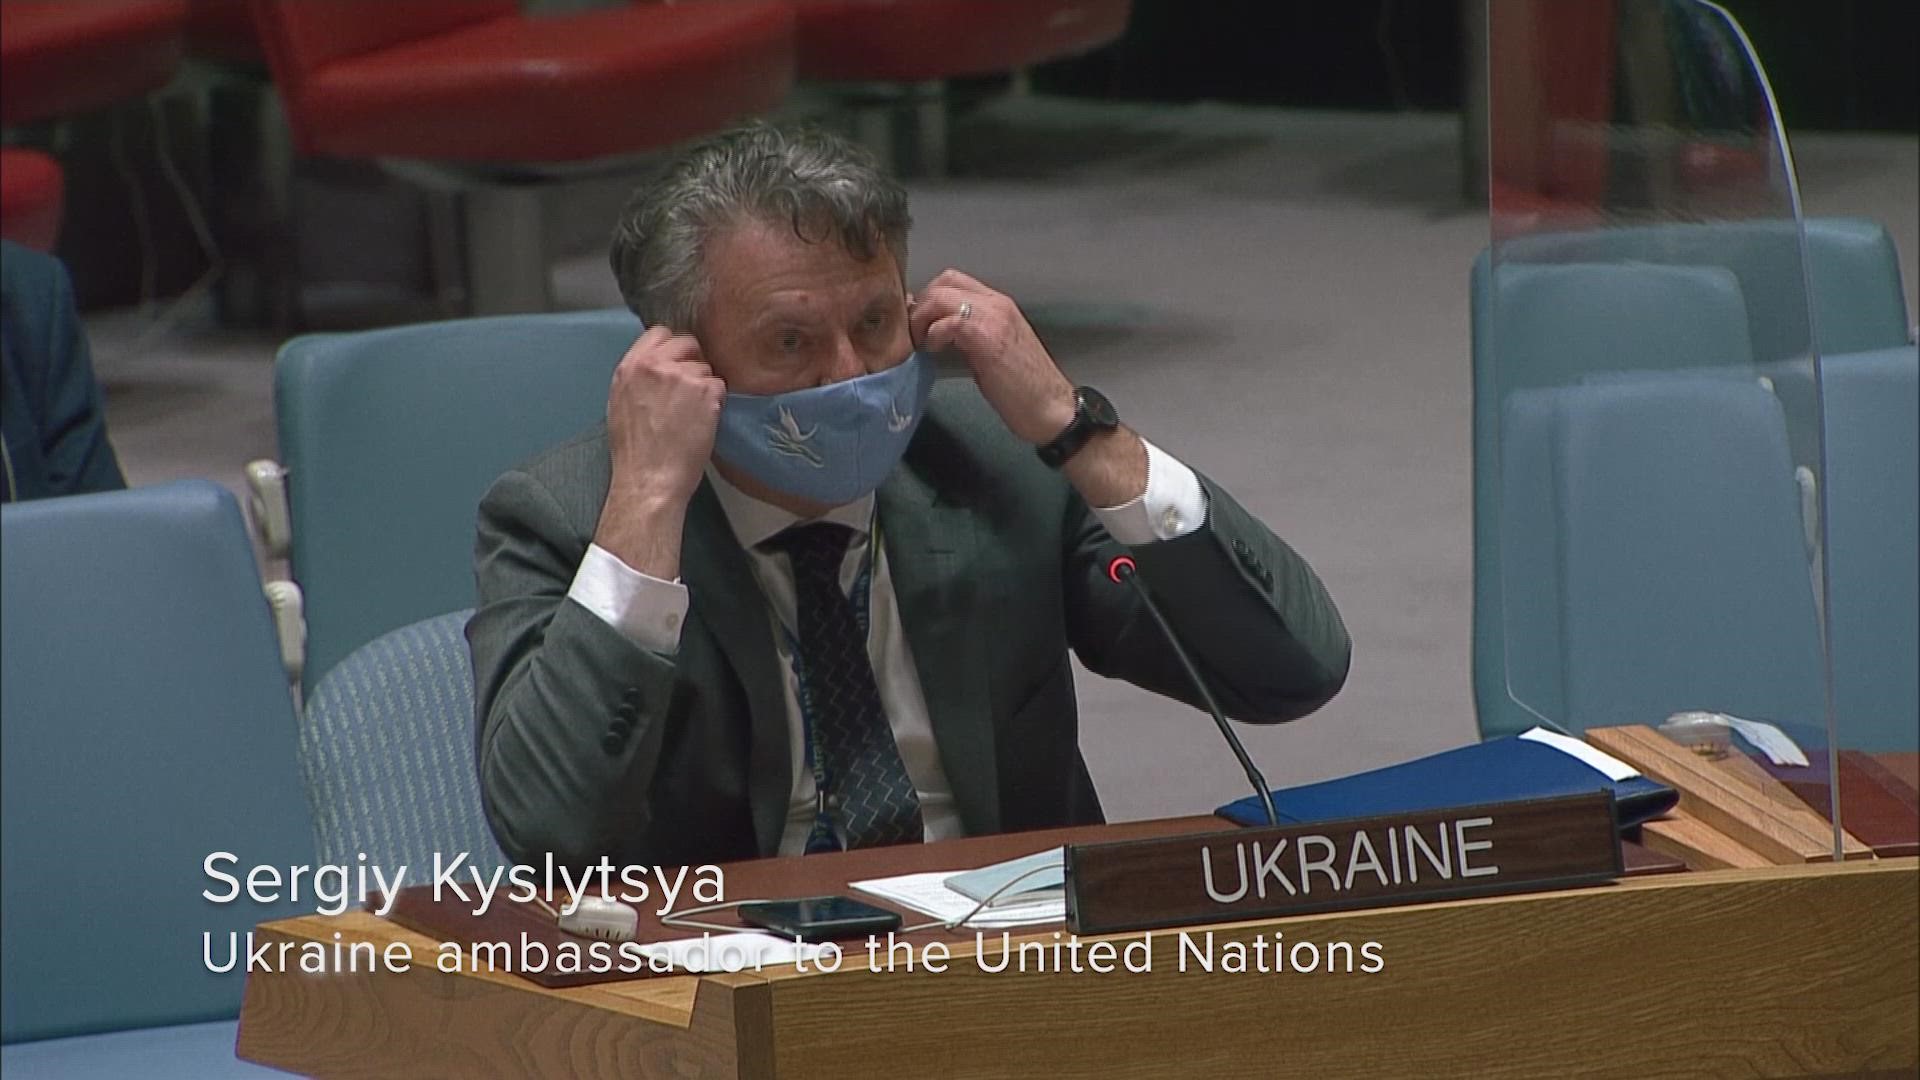 Ukraine's ambassador to the U.N. had heated words for his Russian counterpart as Vladimir Putin's forces began their invasion.